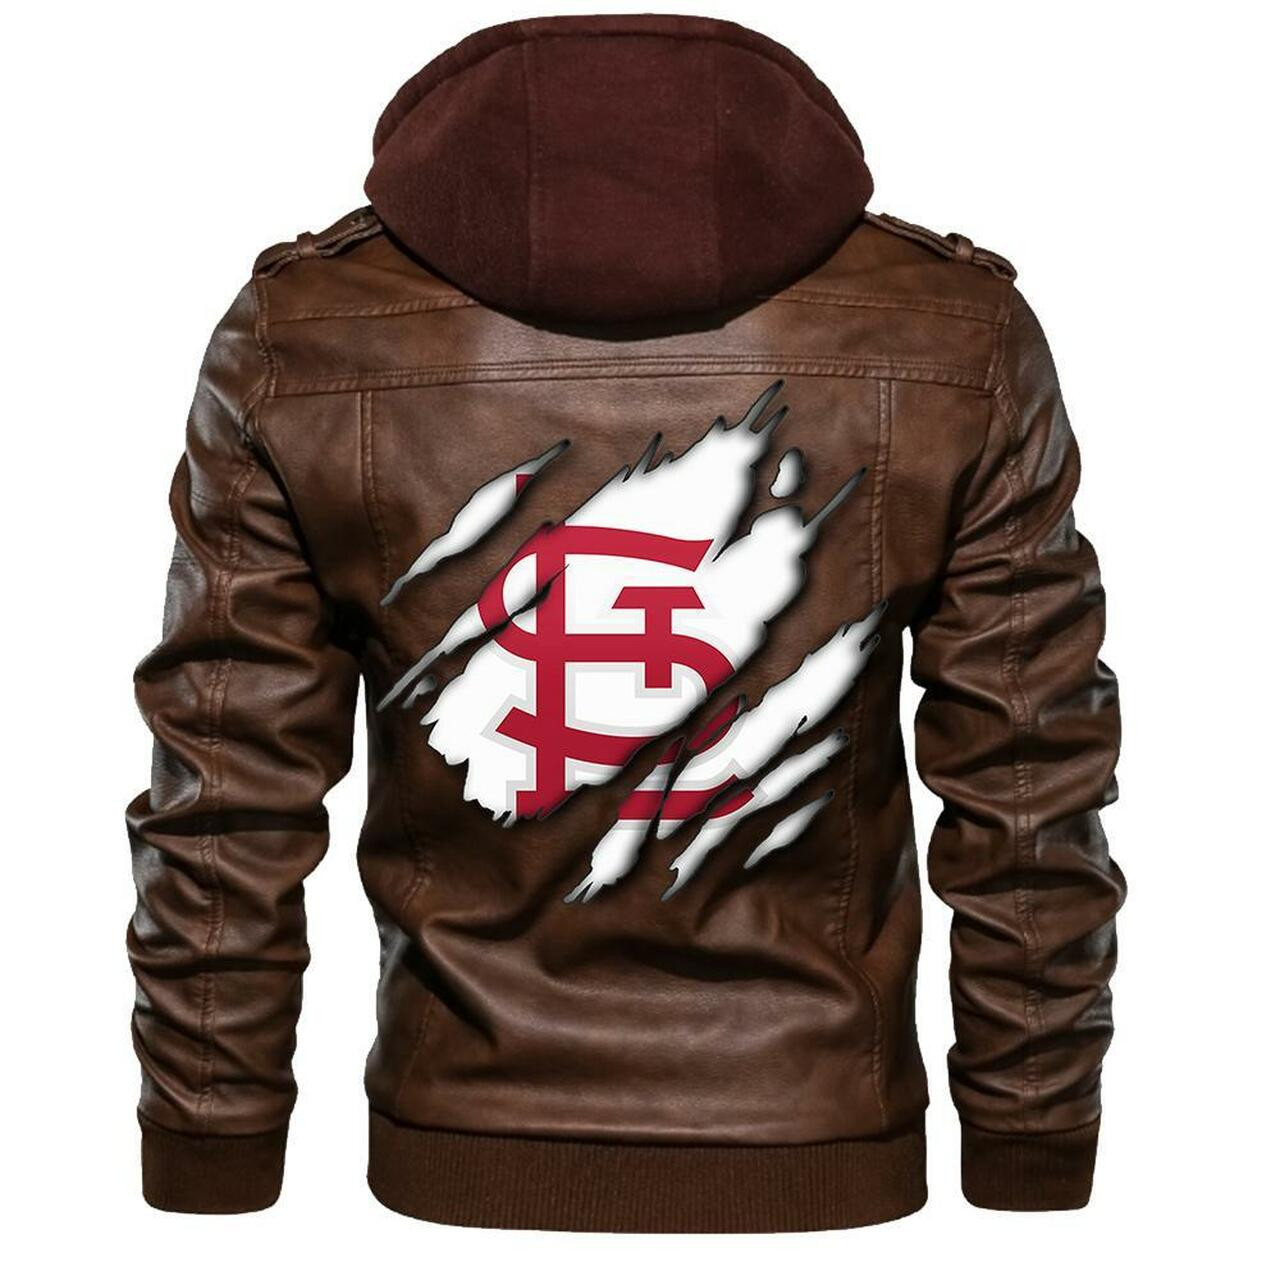 You can find Leather Jacket online at a great price 105